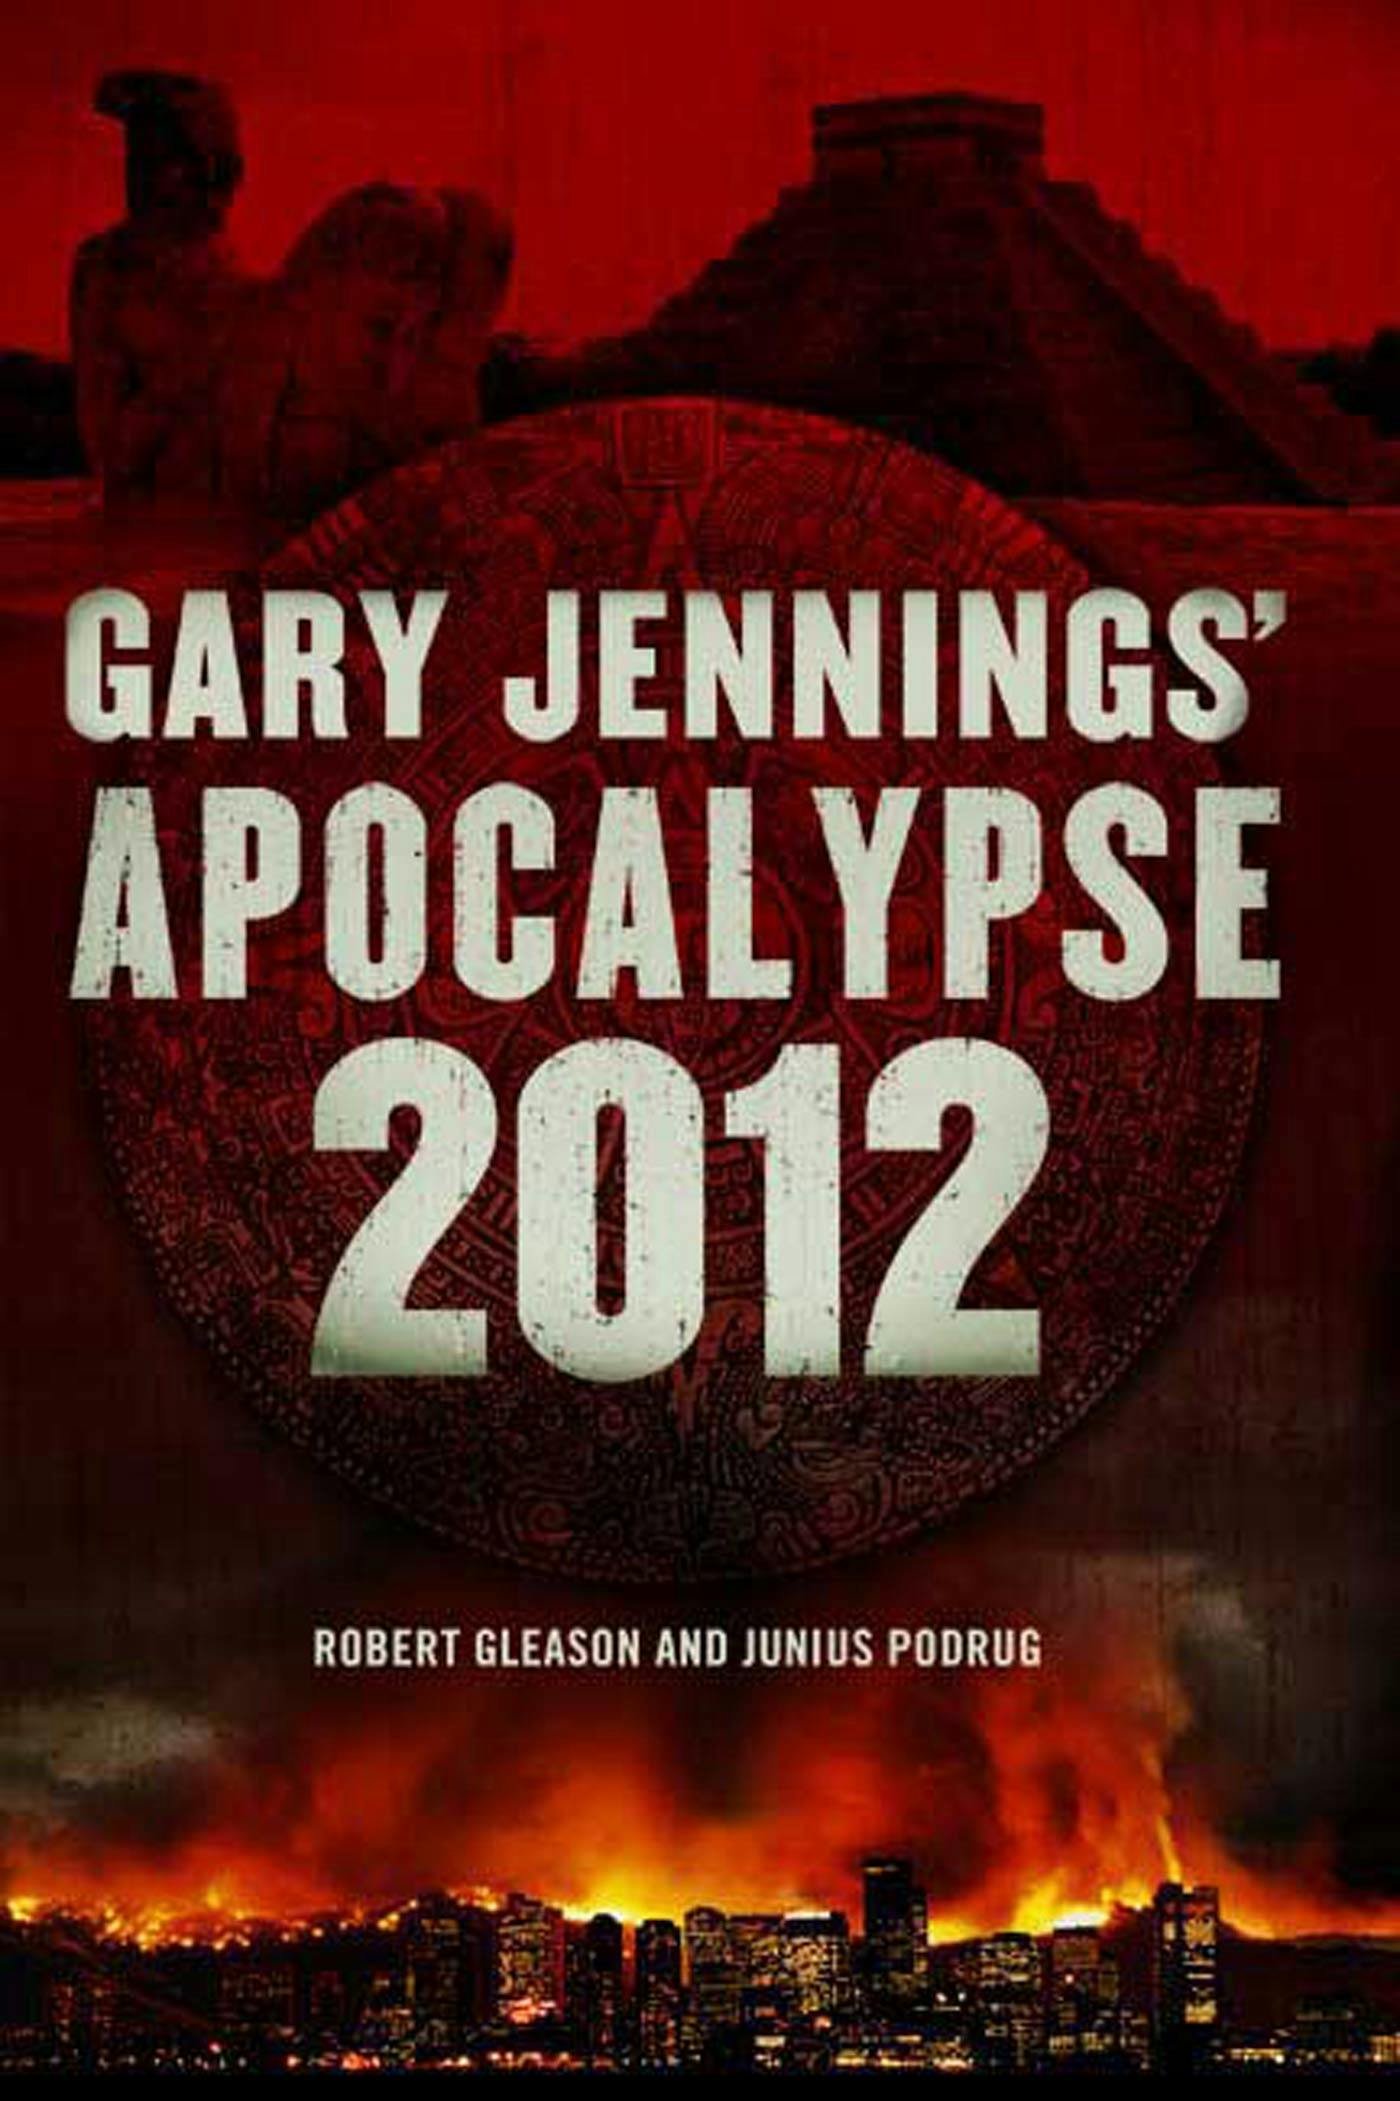 Cover for the book titled as: Apocalypse 2012